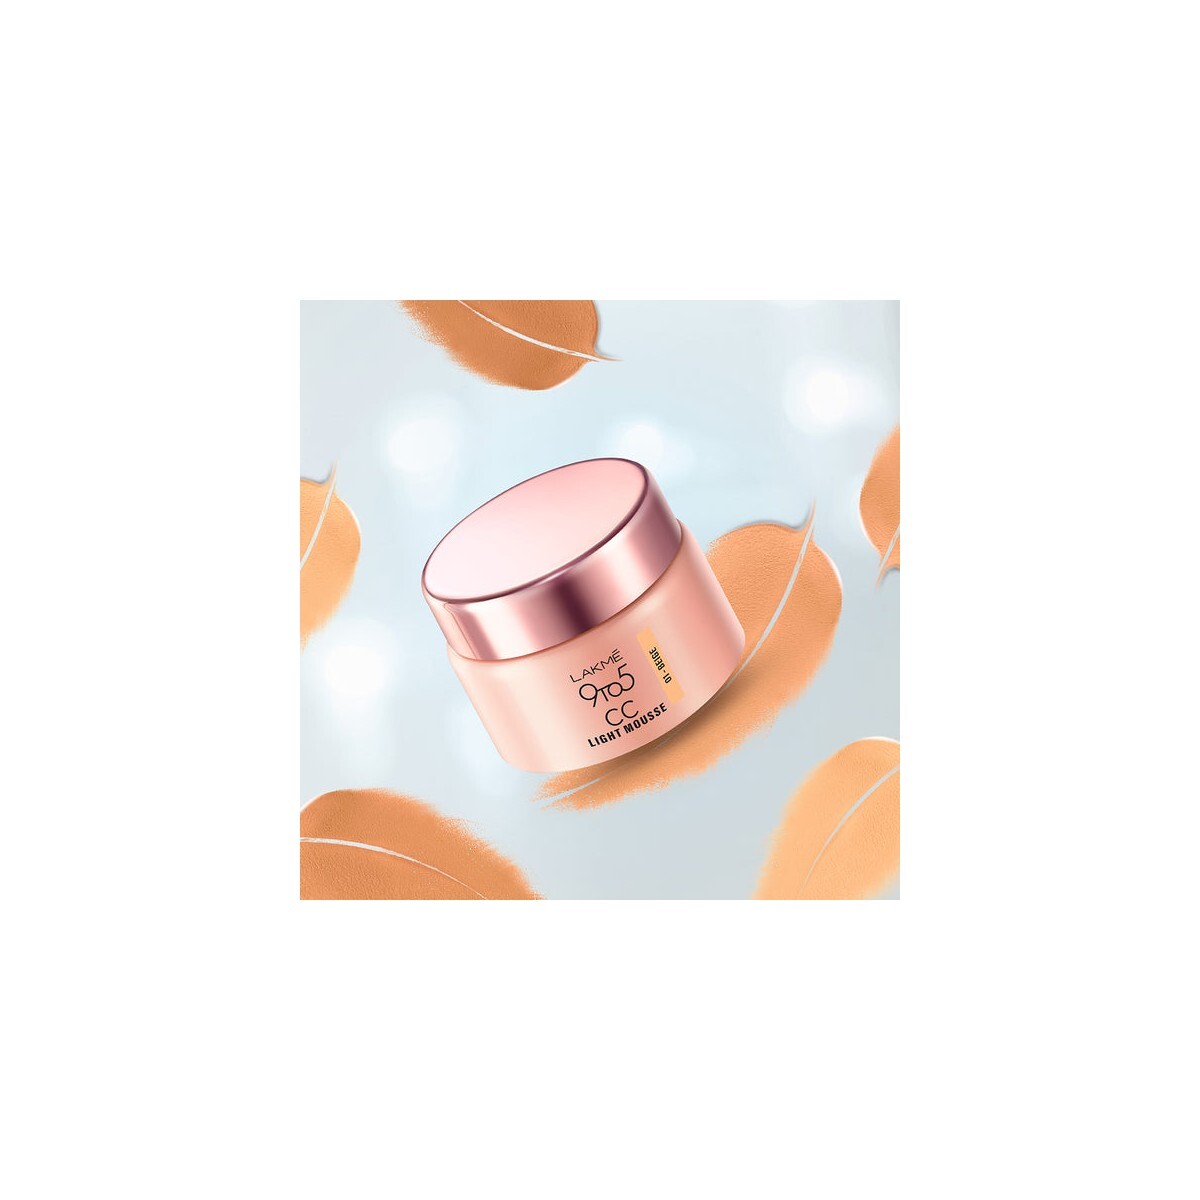 Lakme 9to5 CC Light Mousse with Vitamin E & a Hint of Foundation , Matte finish, Non-Comedogenic, lightweight mousse foundation, 25gm , Cream